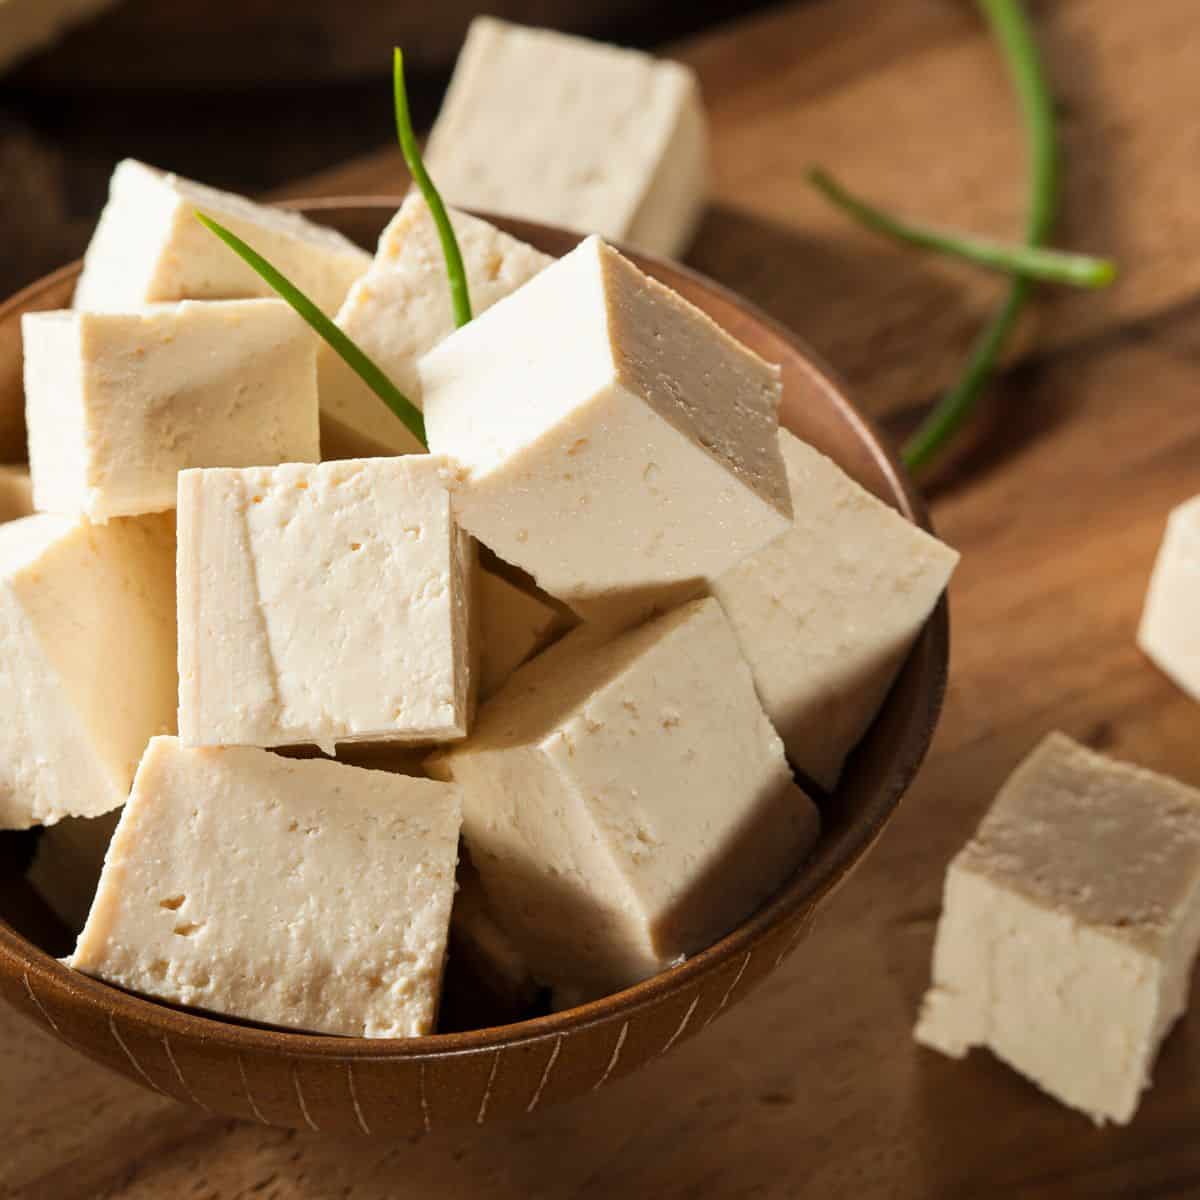 A wood bowl is filled with large cubes of raw tofu.